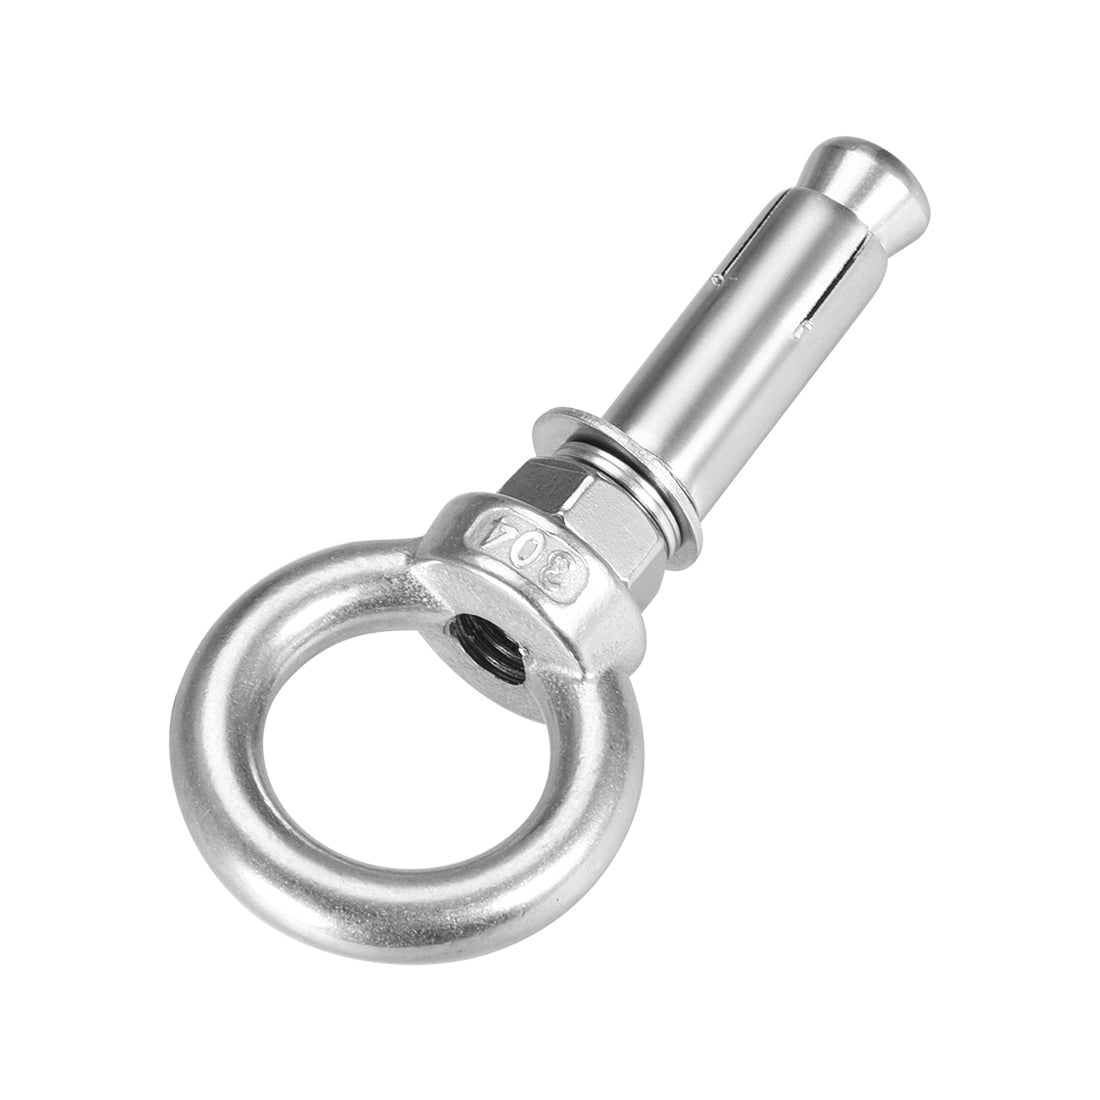 uxcell Uxcell M10 x 60 Expansion Eyebolt Eye Nut Screw with Ring Anchor Raw Bolts 1 Pcs